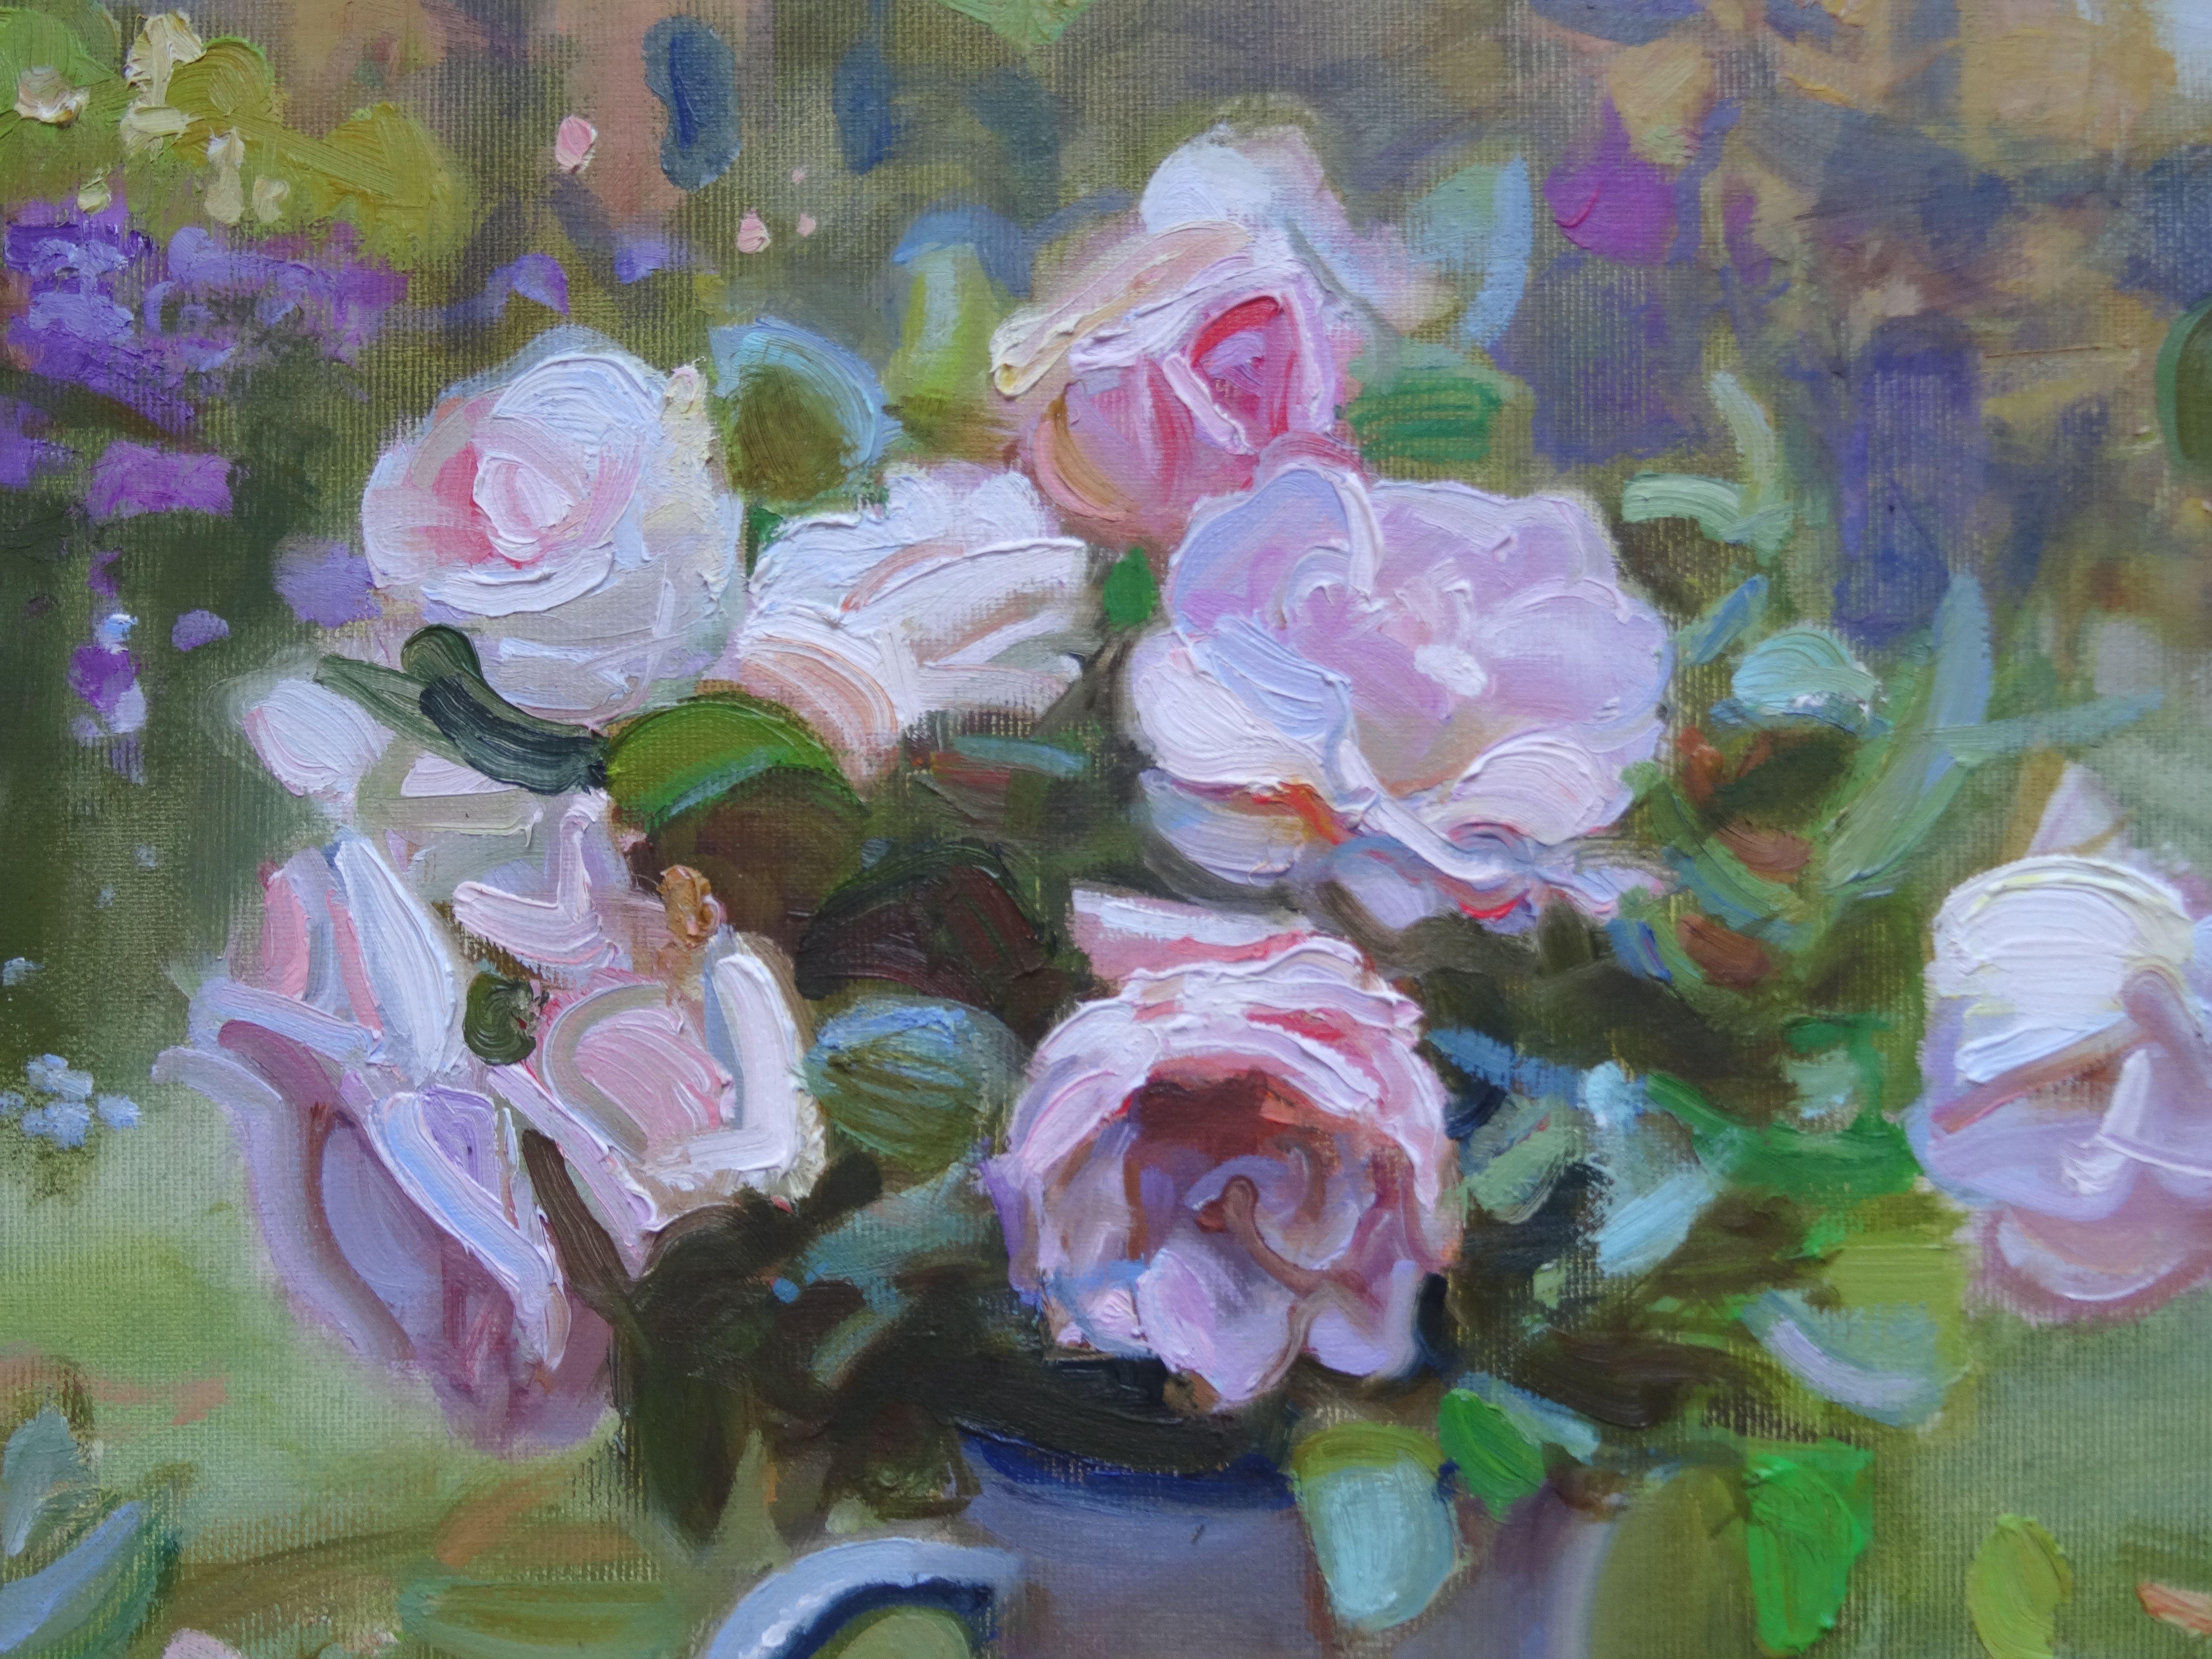 Home roses. 2020. Oil on canvas, 50x60 cm - Painting by Valery Bayda 